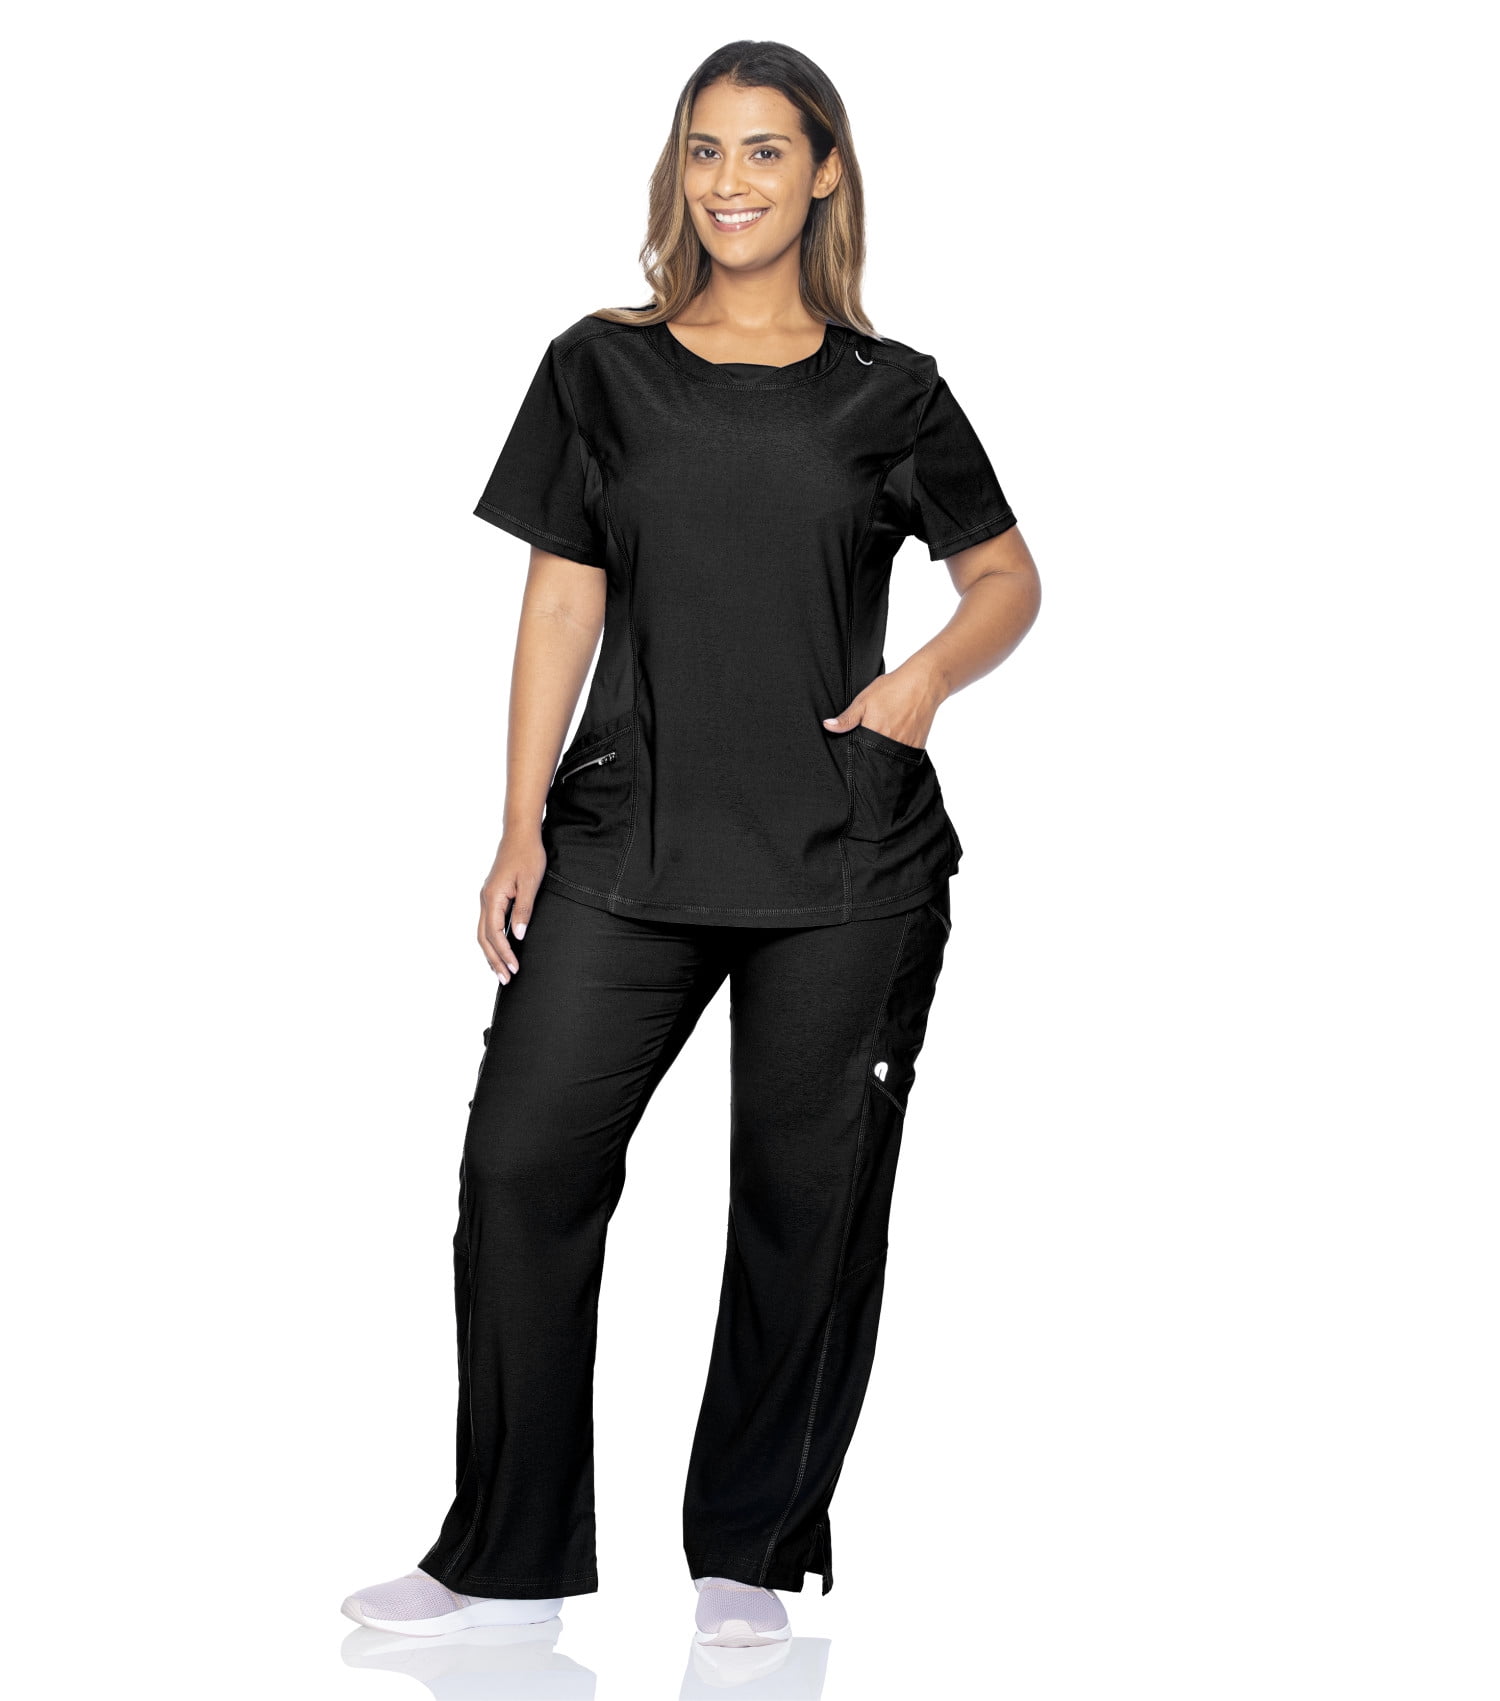 ave Scrubs 5570BLKXXLT Women's Medical Scrub Pant, Pacific Ave, Slimming  Straight Leg Style, Cargo Pockets, Great for Nurses, Black, 2X-Large Tall